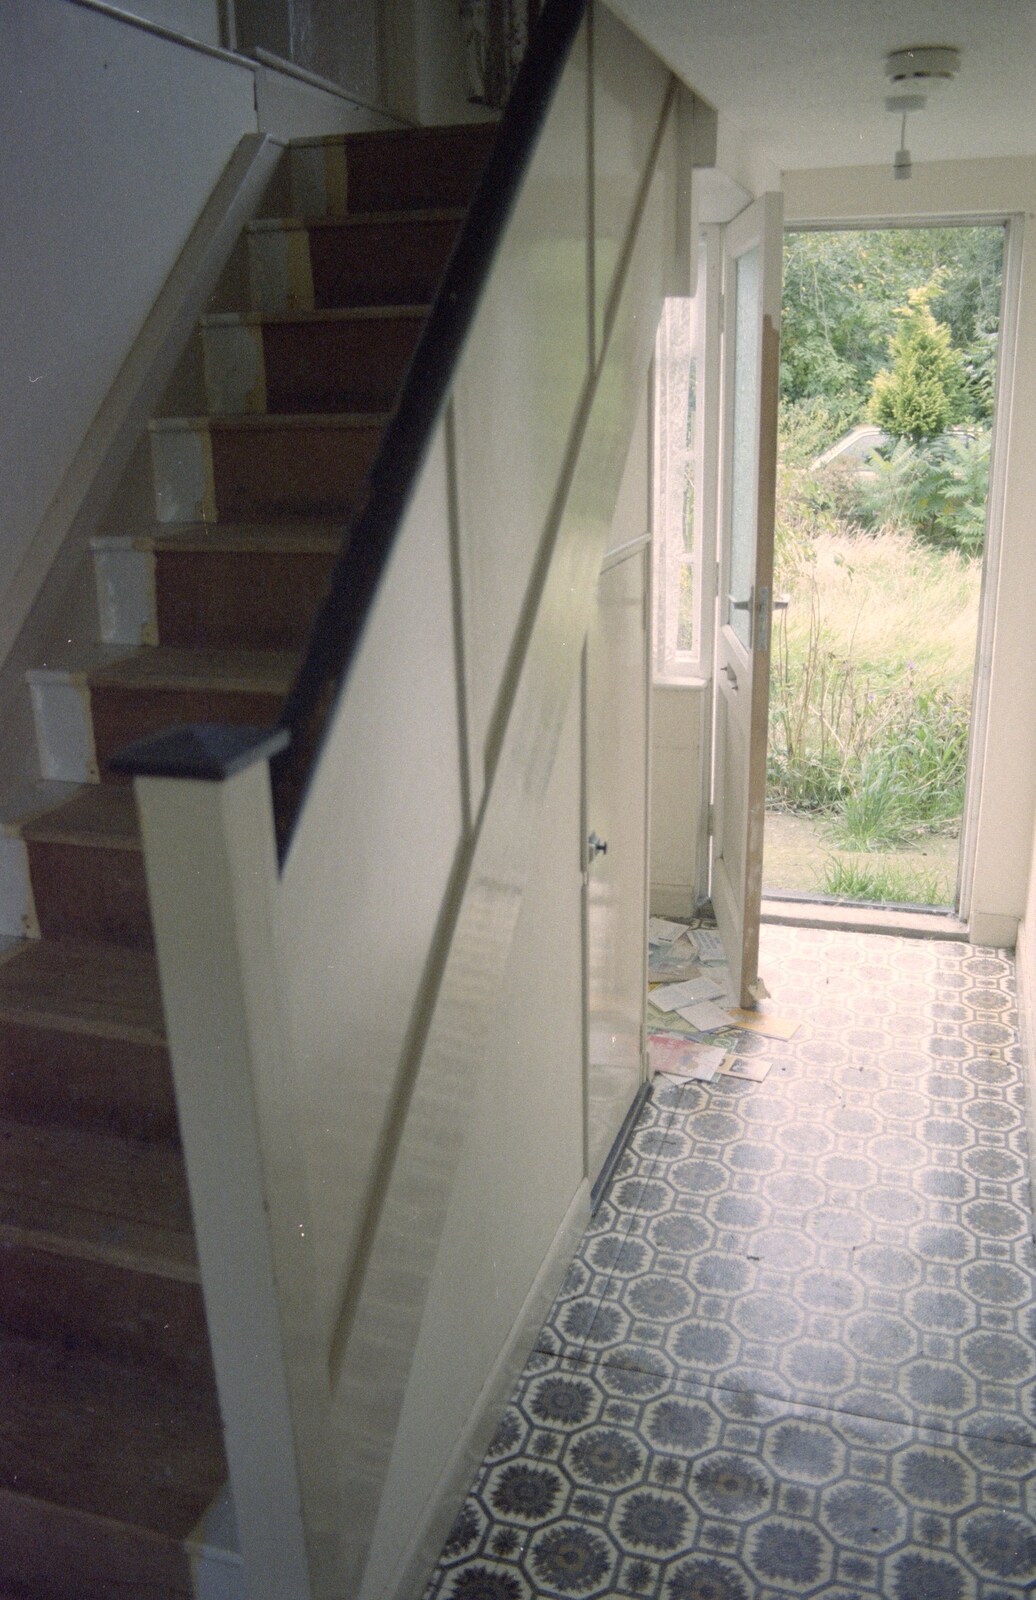 The entrance hall and staircase from Moving In, Brome, Suffolk - 10th April 1994